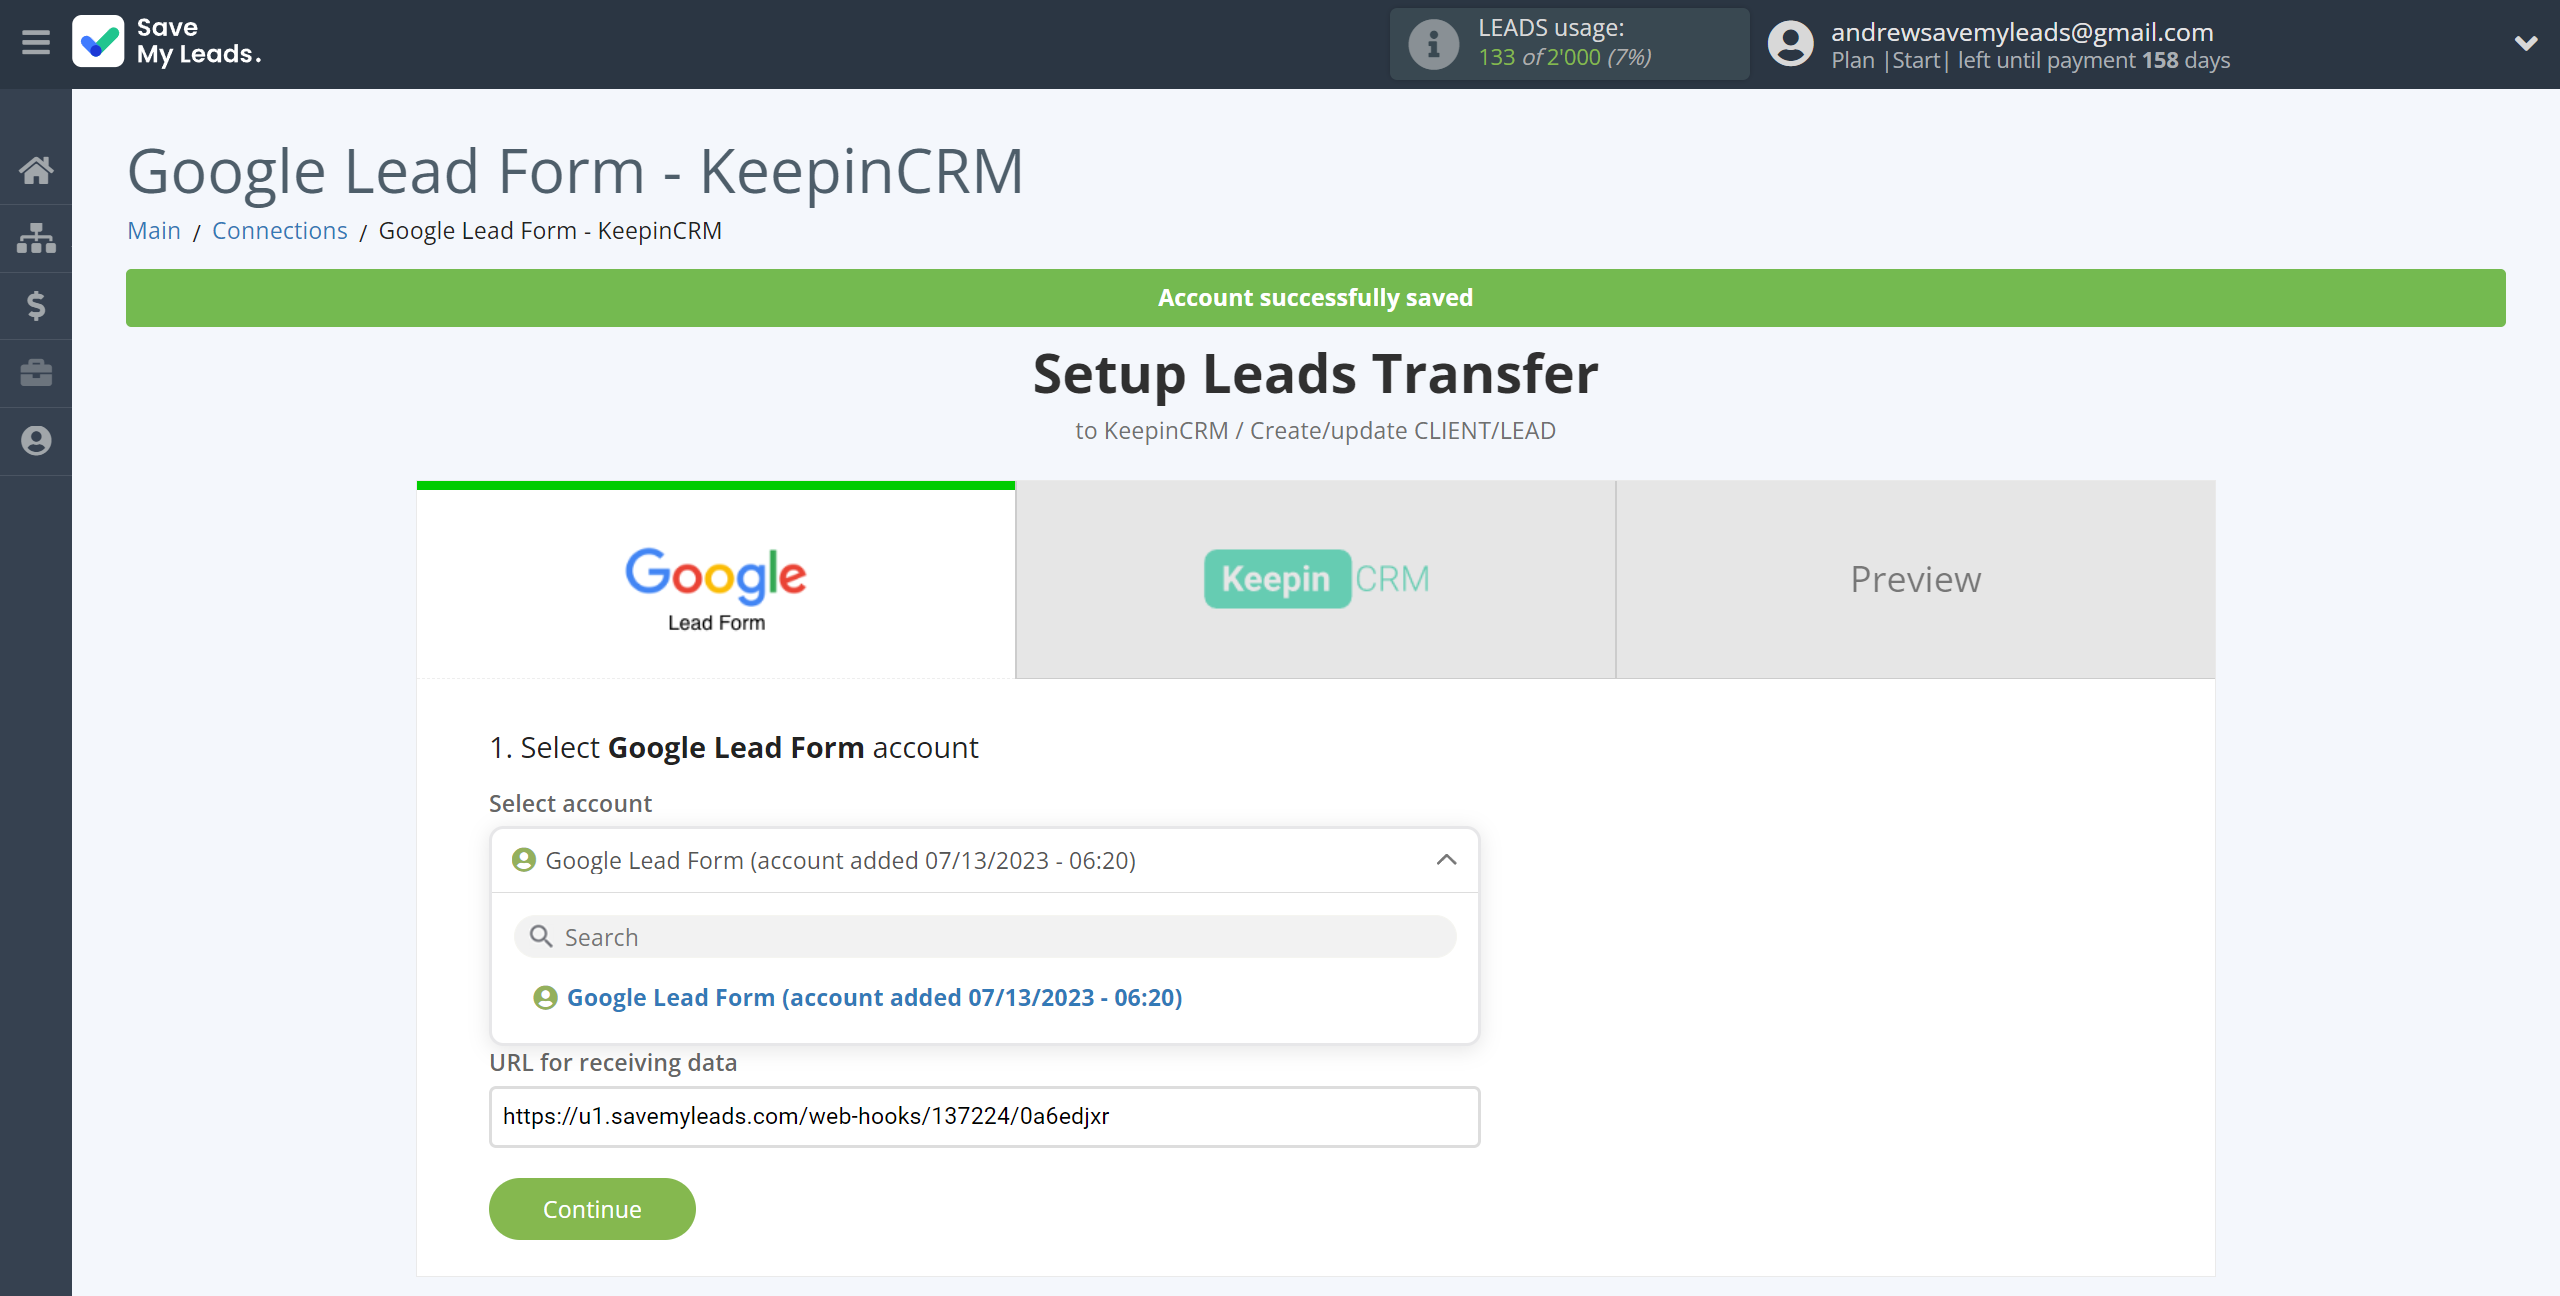 How to Connect Google Lead Form with KeepinCRM Create/update Client/Lead | Data Source account selection